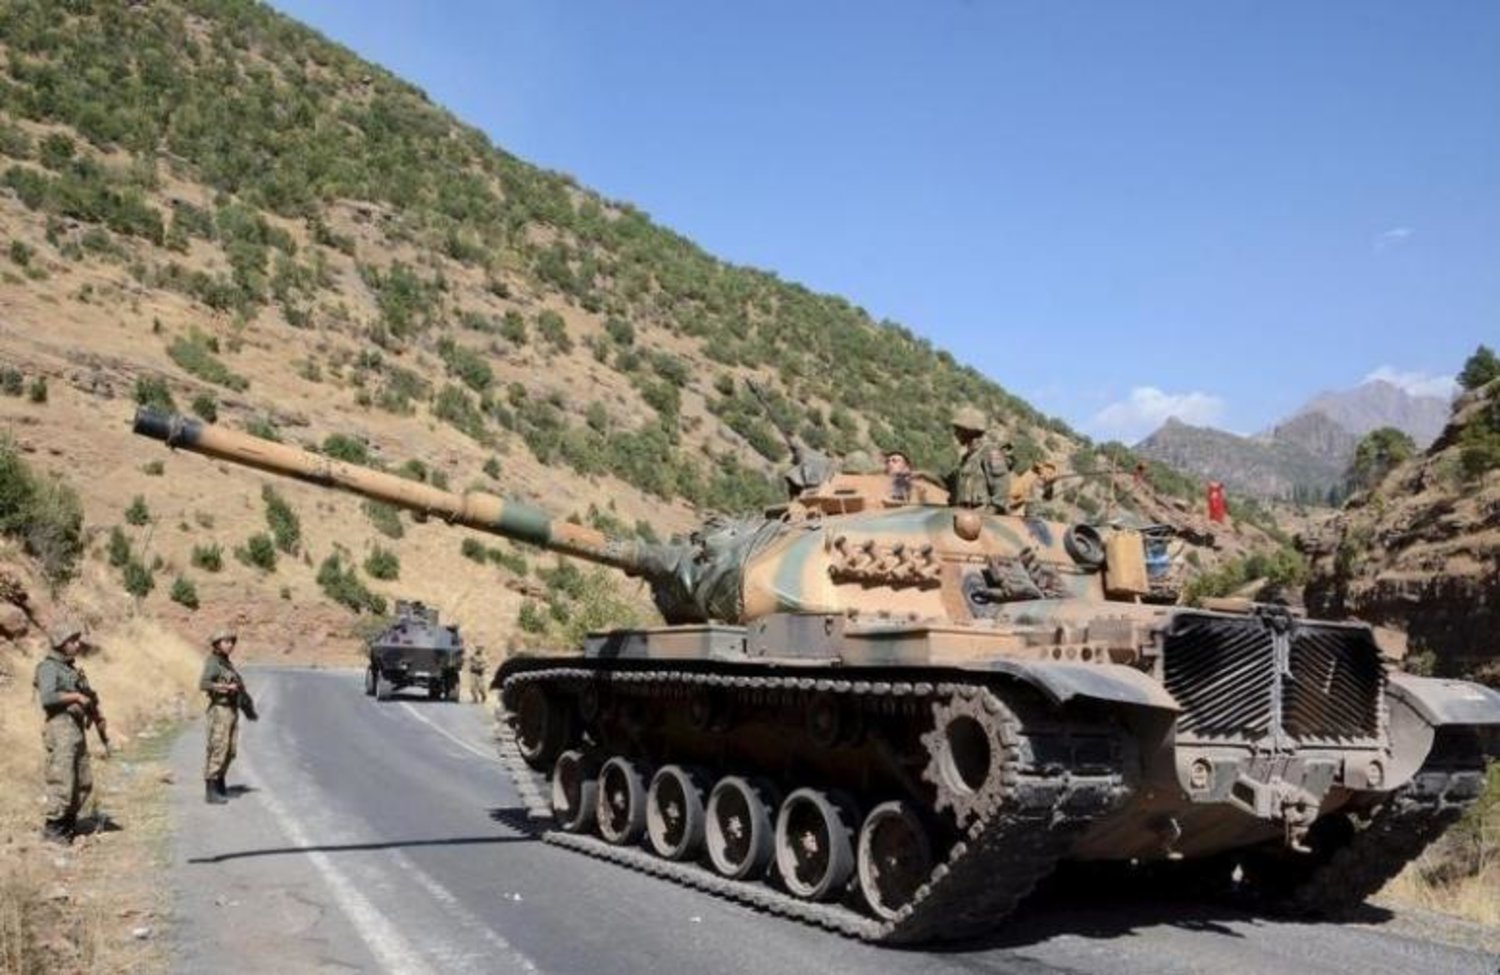 Turkish soldiers in a tank and an armored vehicle patrol on the road to the town of Beytussebab in the southeastern Sirnak province, Turkey, September 28, 2015. REUTERS/Stringer